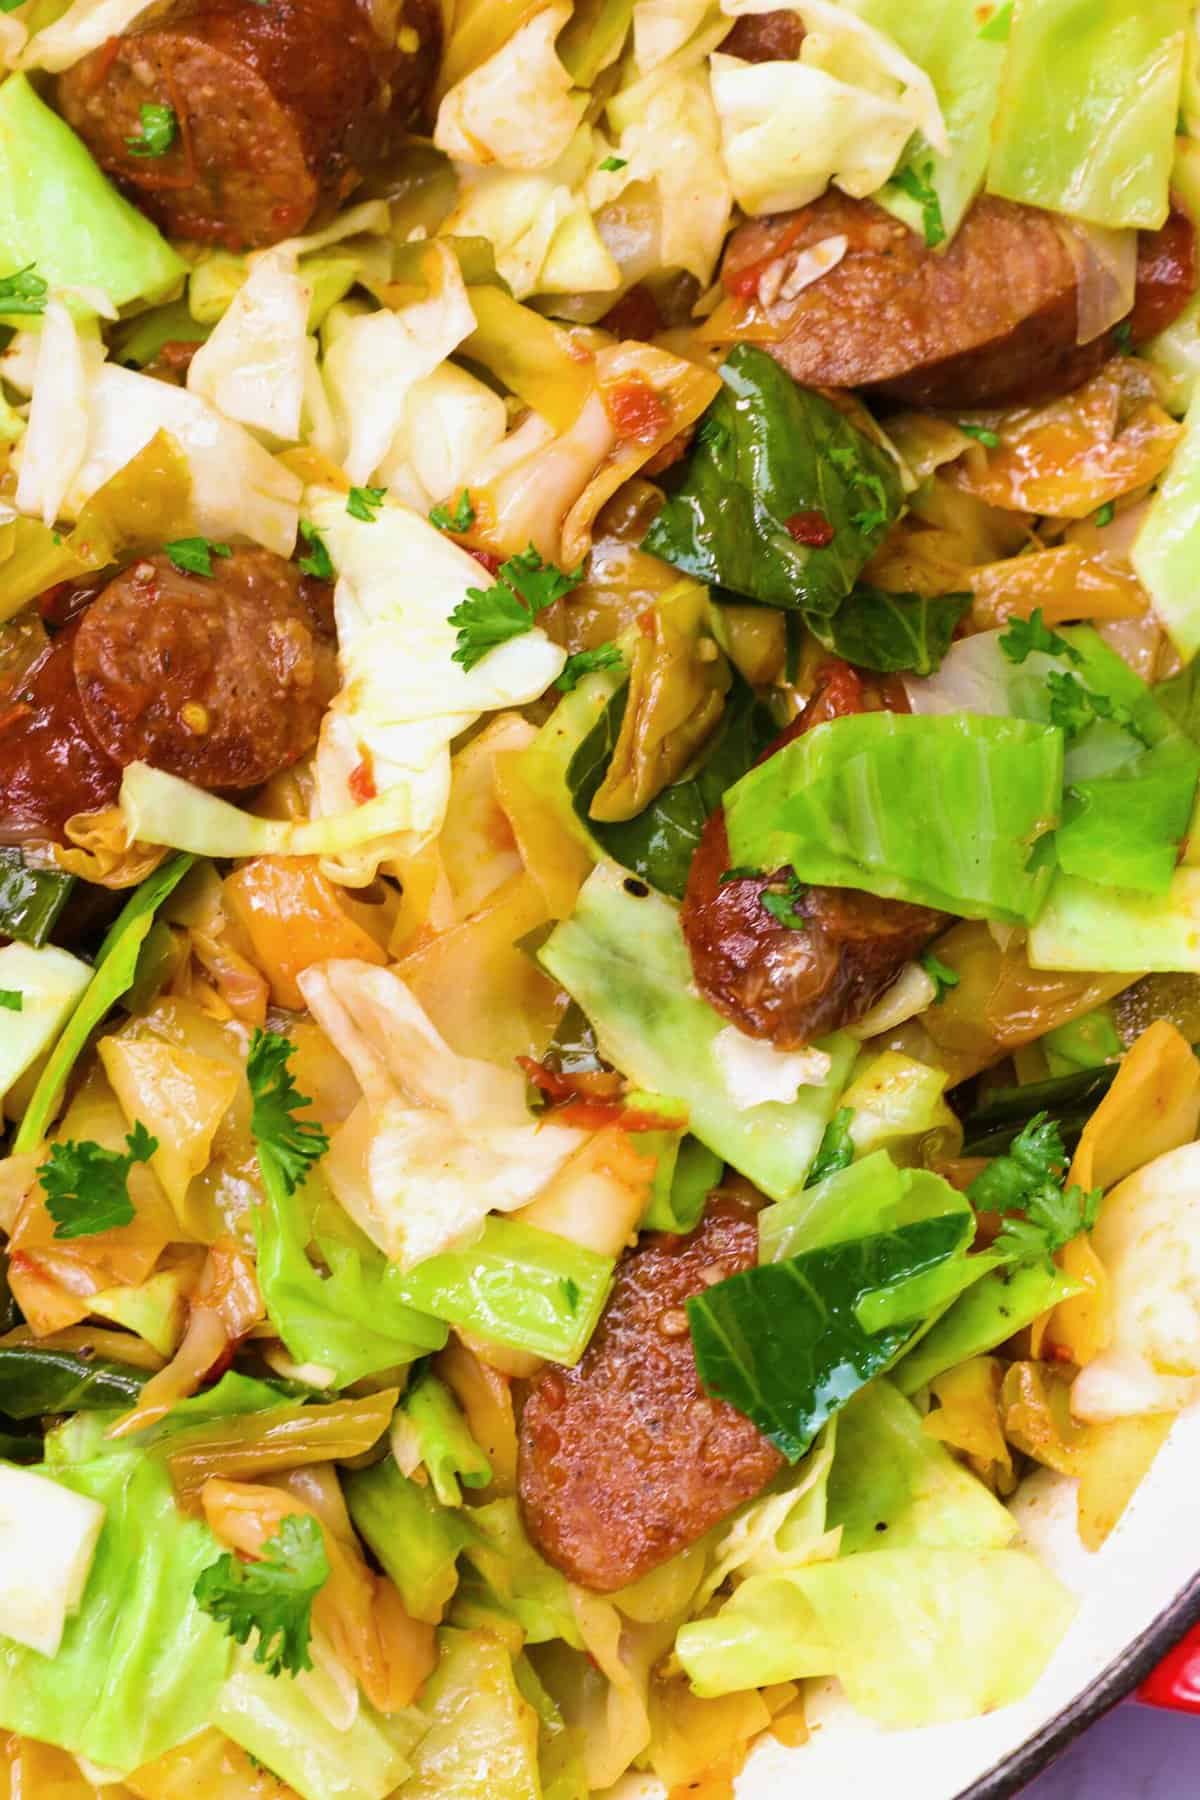 Cabbage and sausage for authentic comfort food